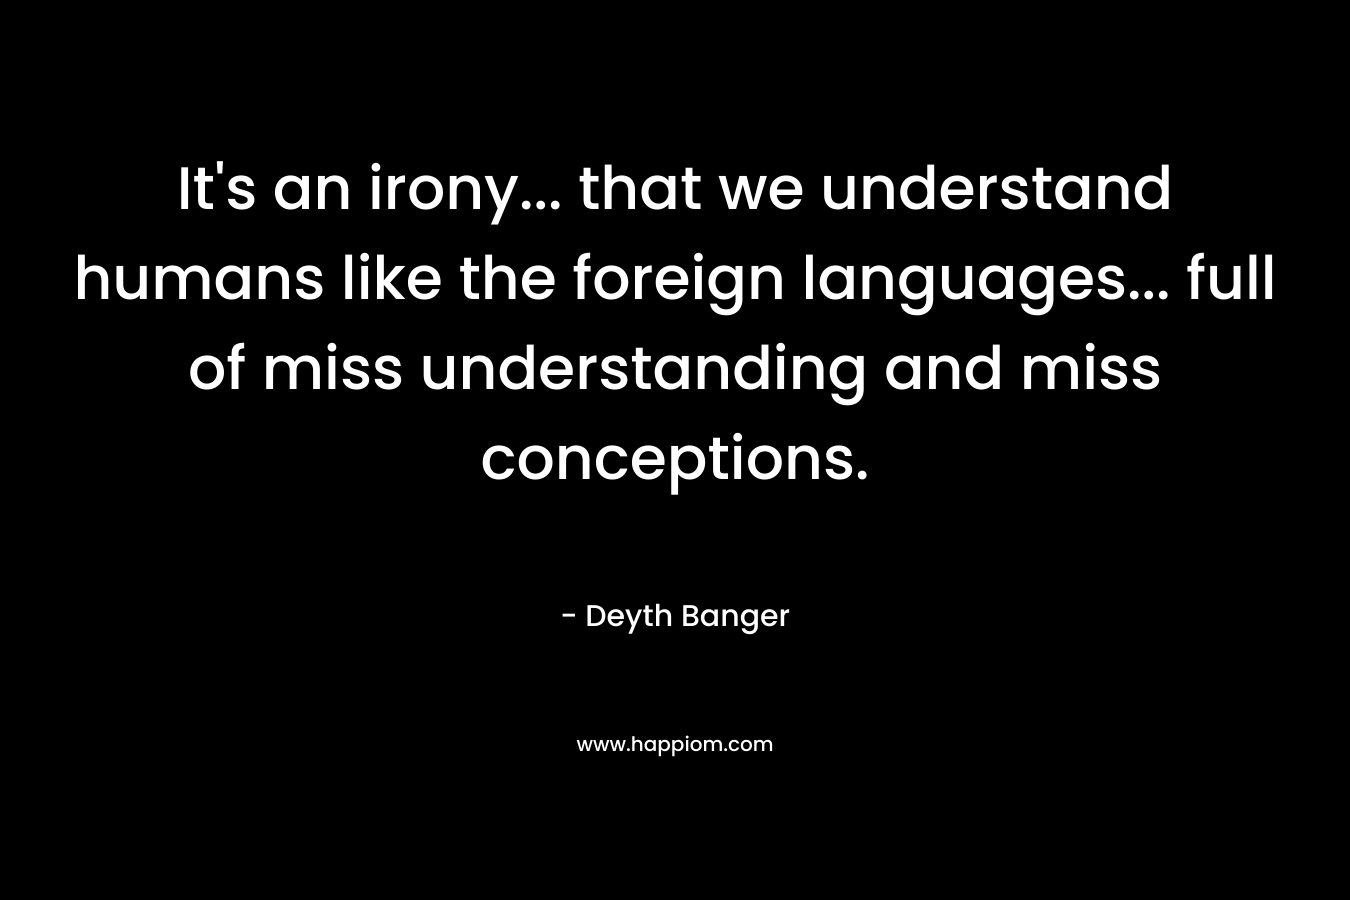 It's an irony... that we understand humans like the foreign languages... full of miss understanding and miss conceptions.